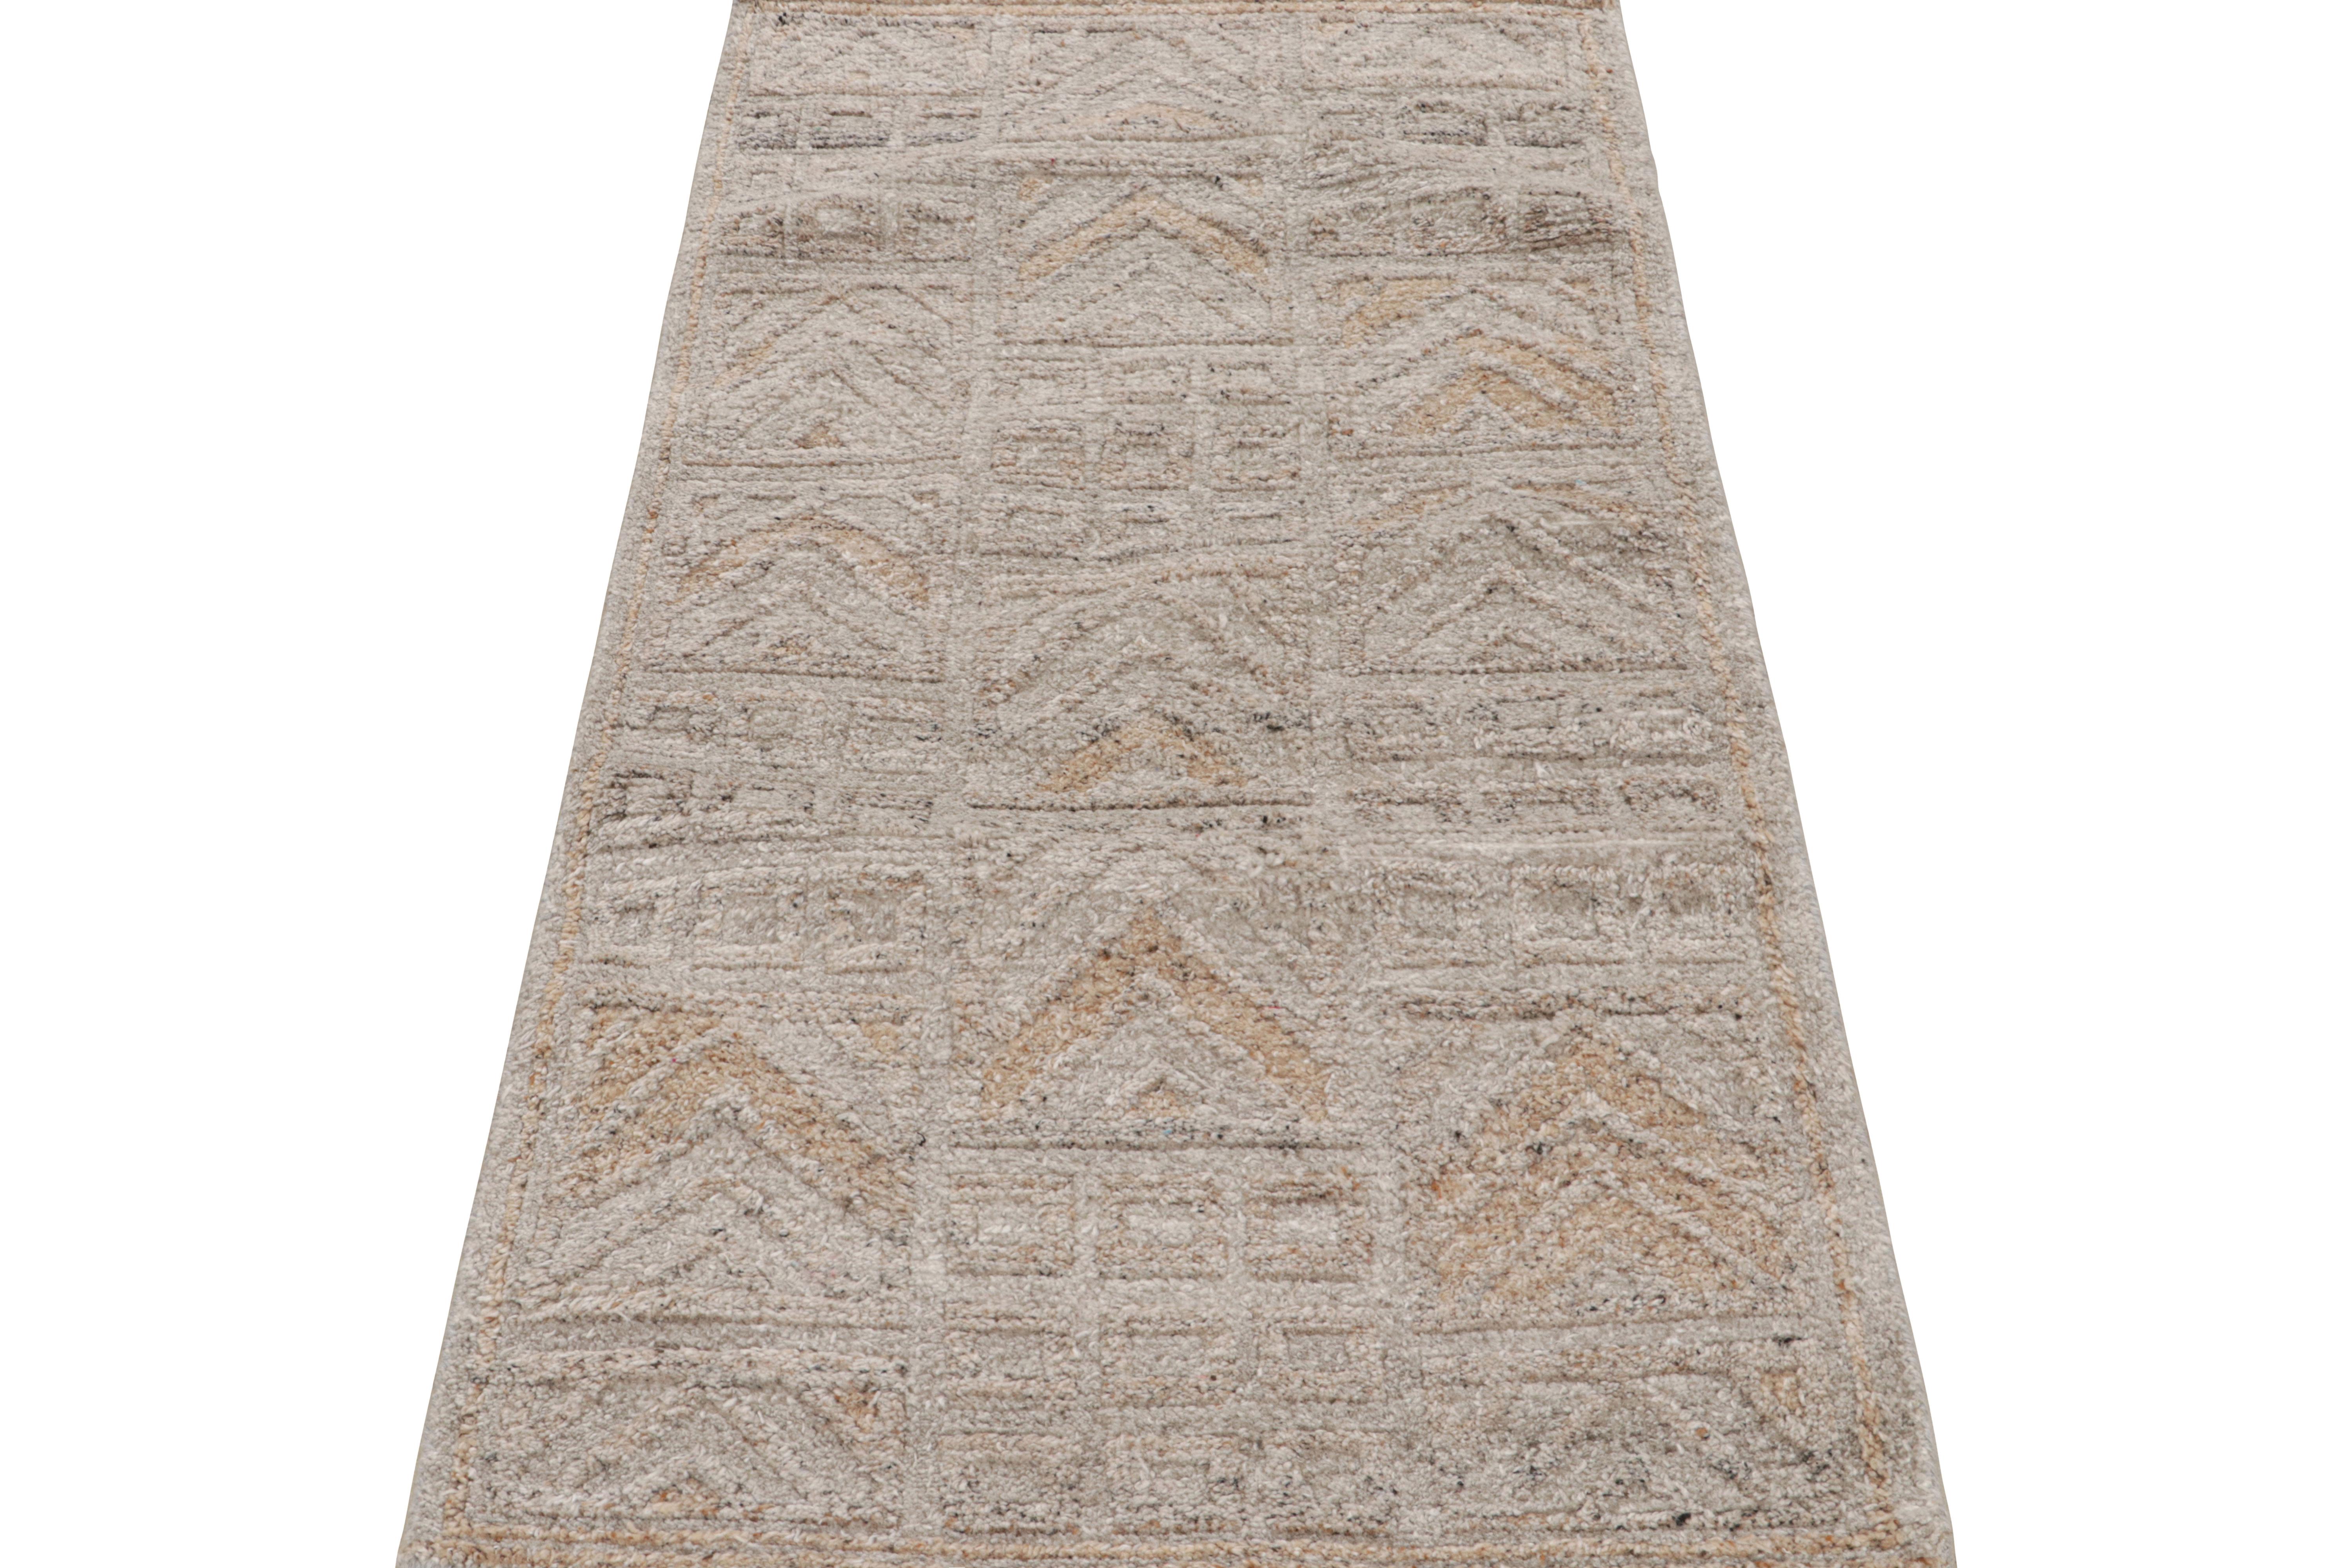 Scandinavian Modern Rug & Kilim’s Outdoor Scandinavian Style Runner in Gray with Geometric Patterns For Sale